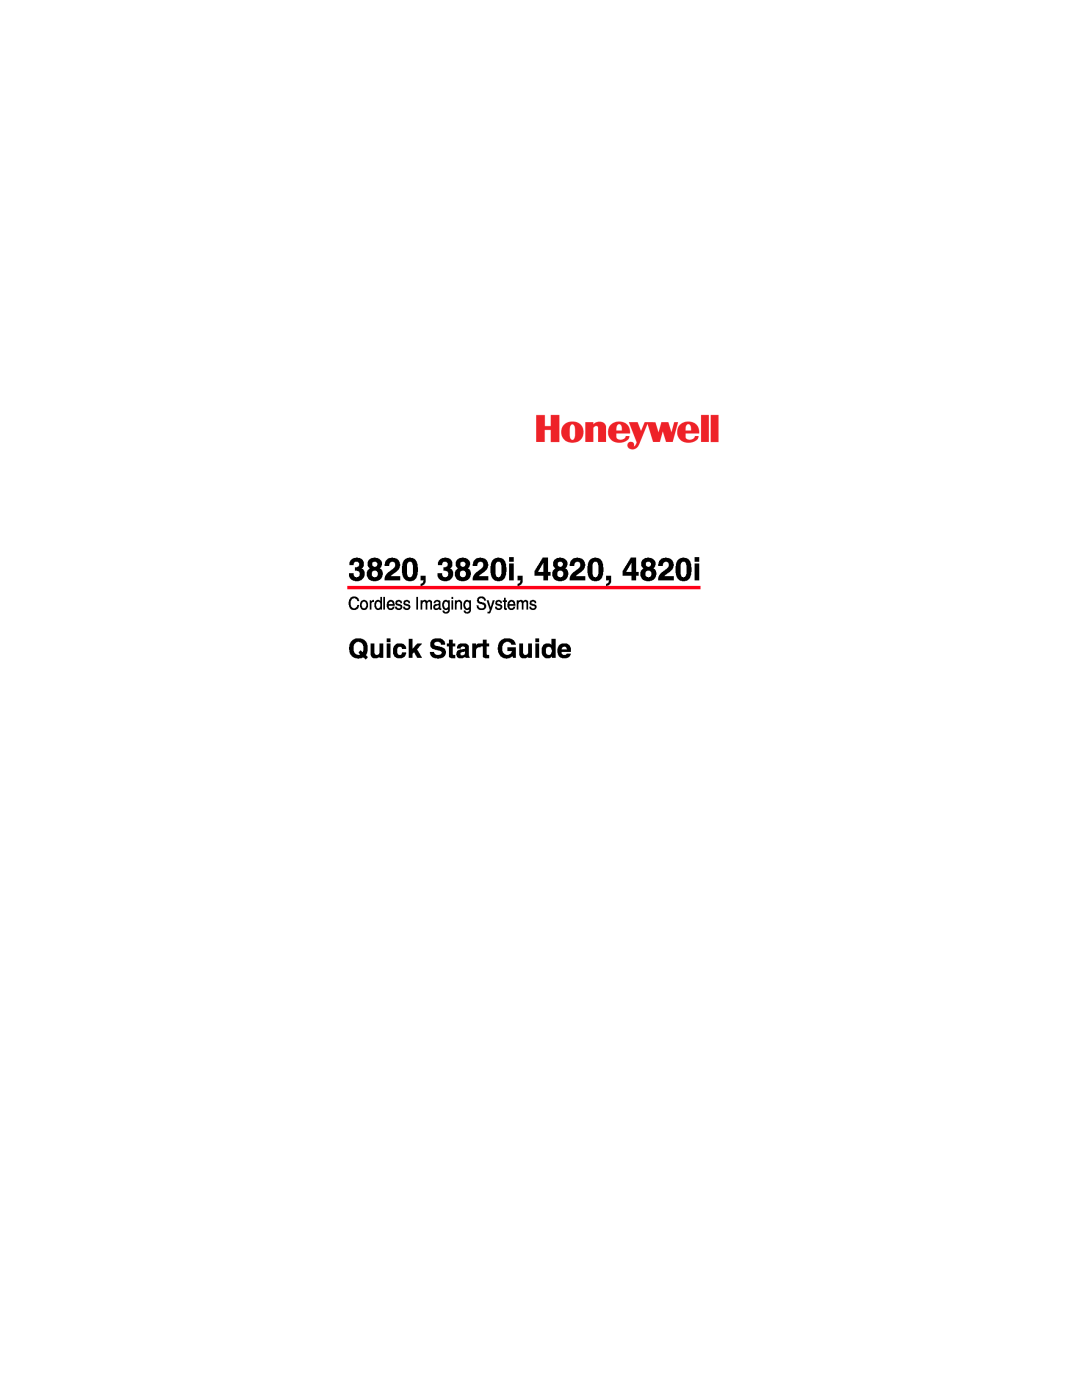 Honeywell 4820i quick start 3820, 3820i, 4820, Quick Start Guide, Cordless Imaging Systems 